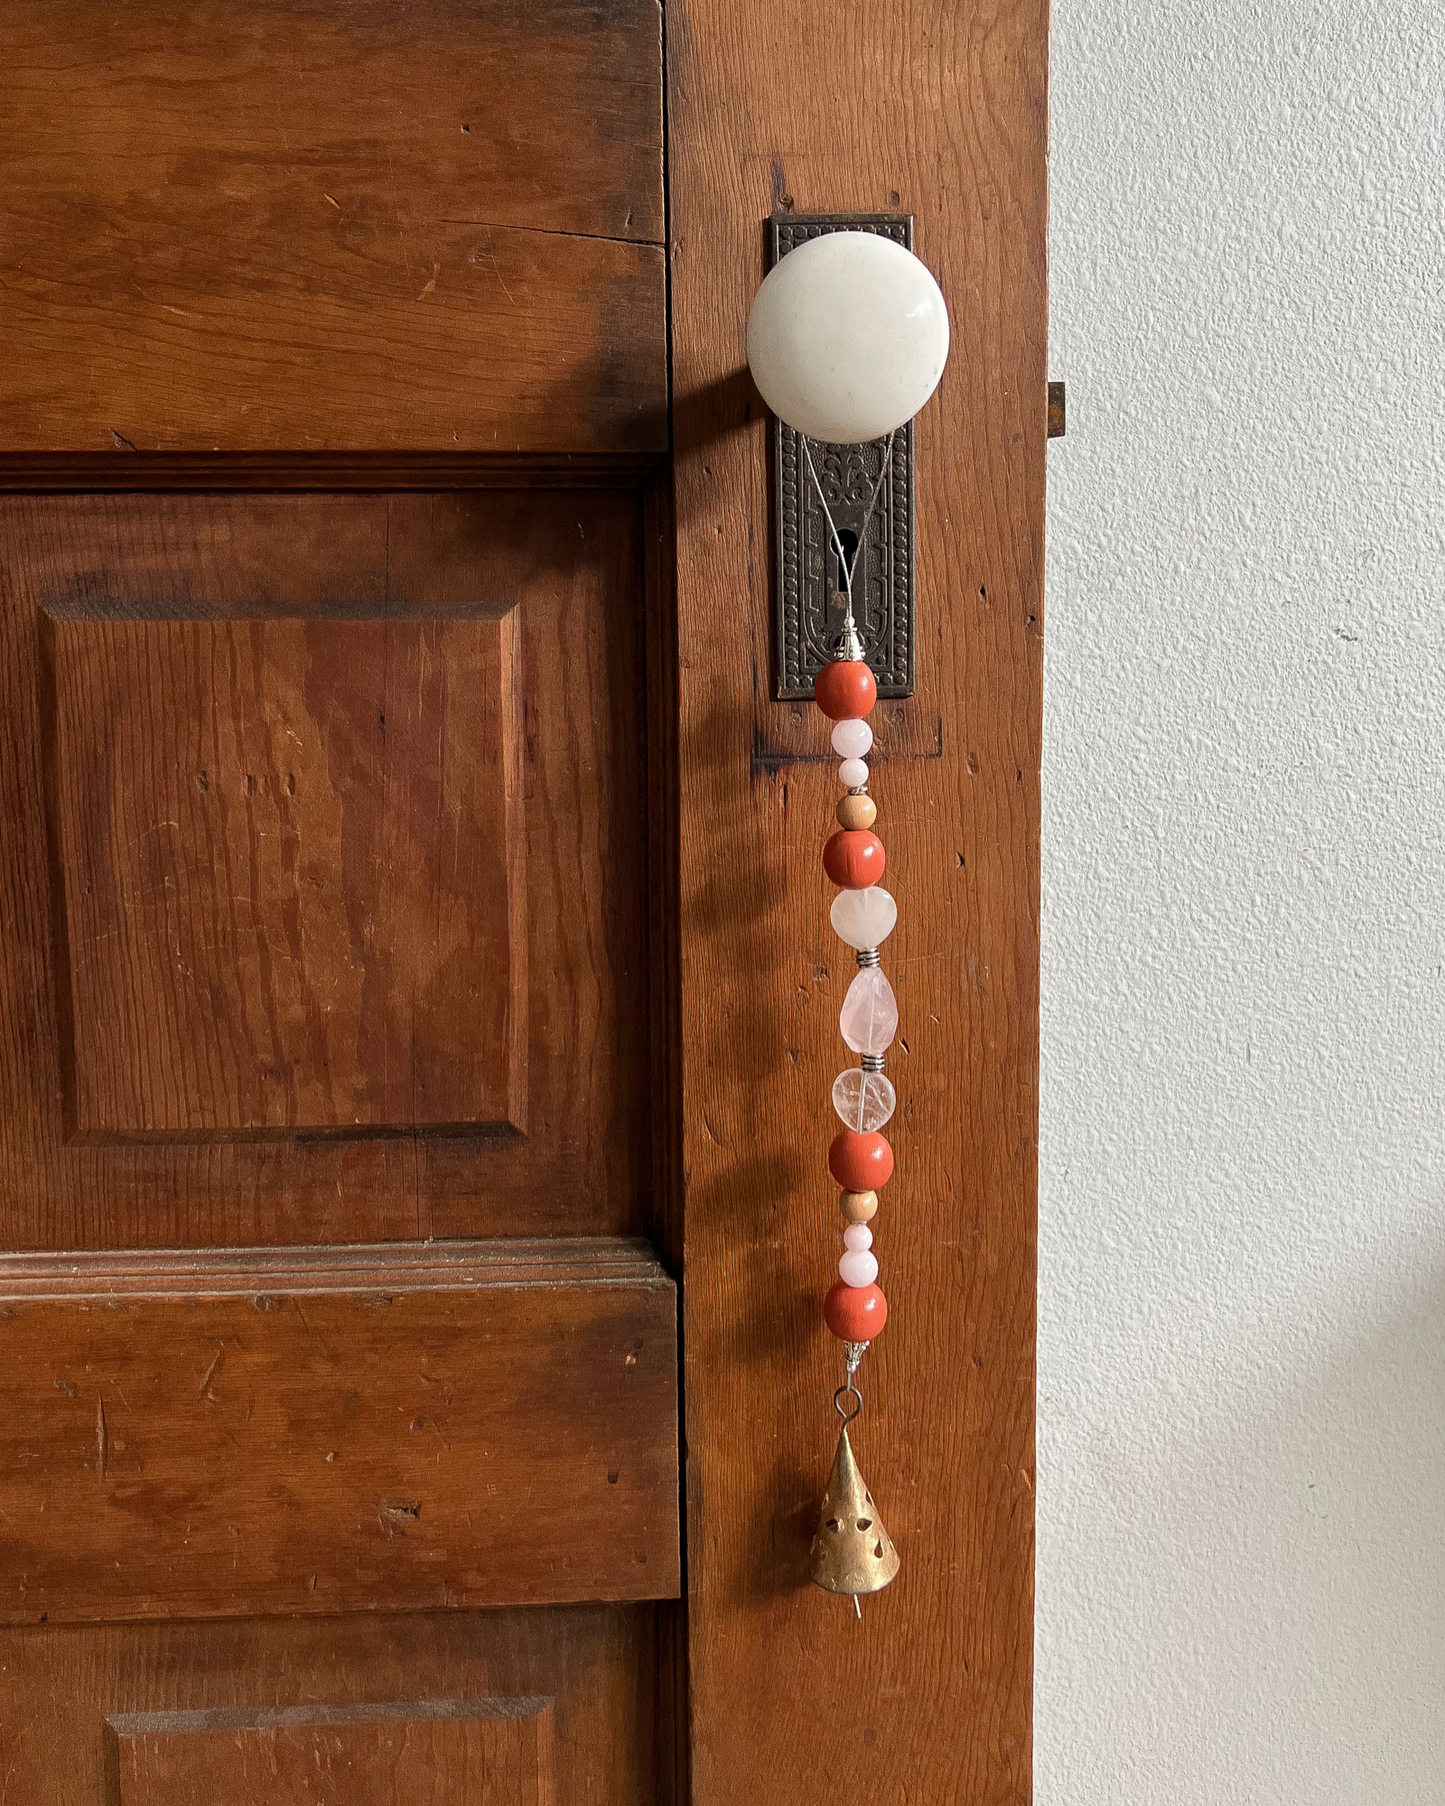 Single strand of wooden beads, rose quartz, and a golden bell hang from an antique doorknob.